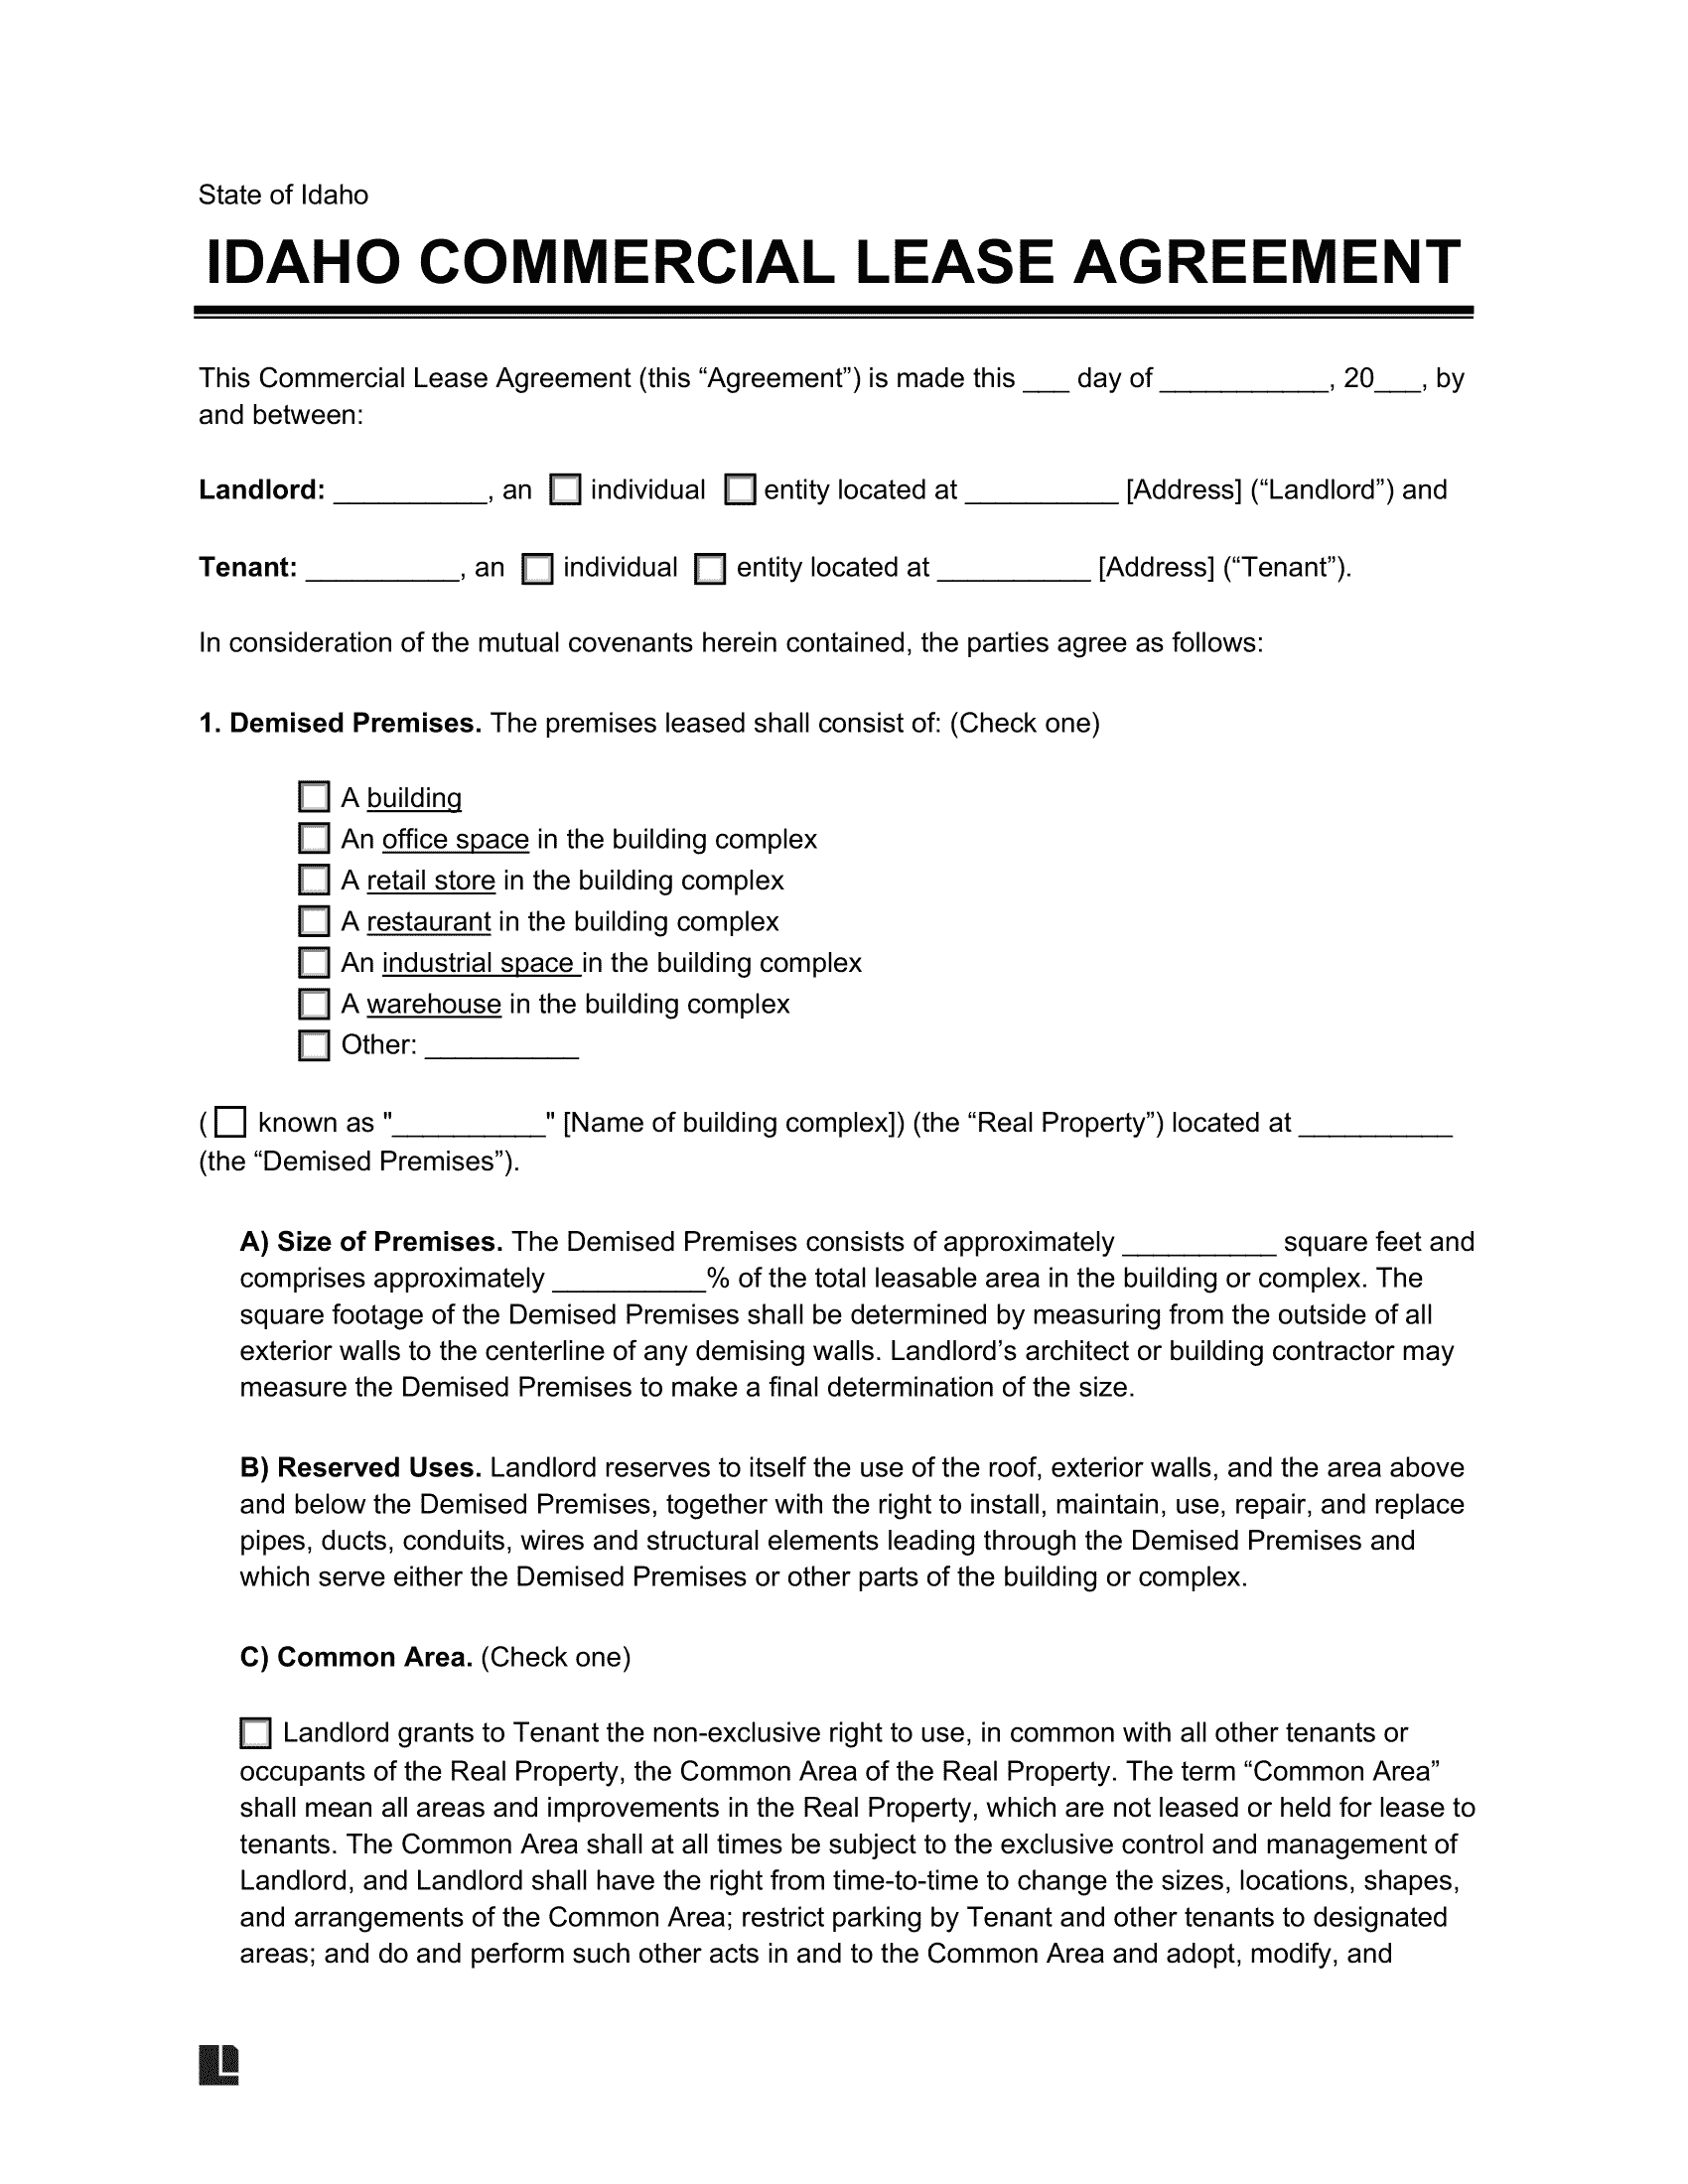 Idaho Commercial Lease Agreement